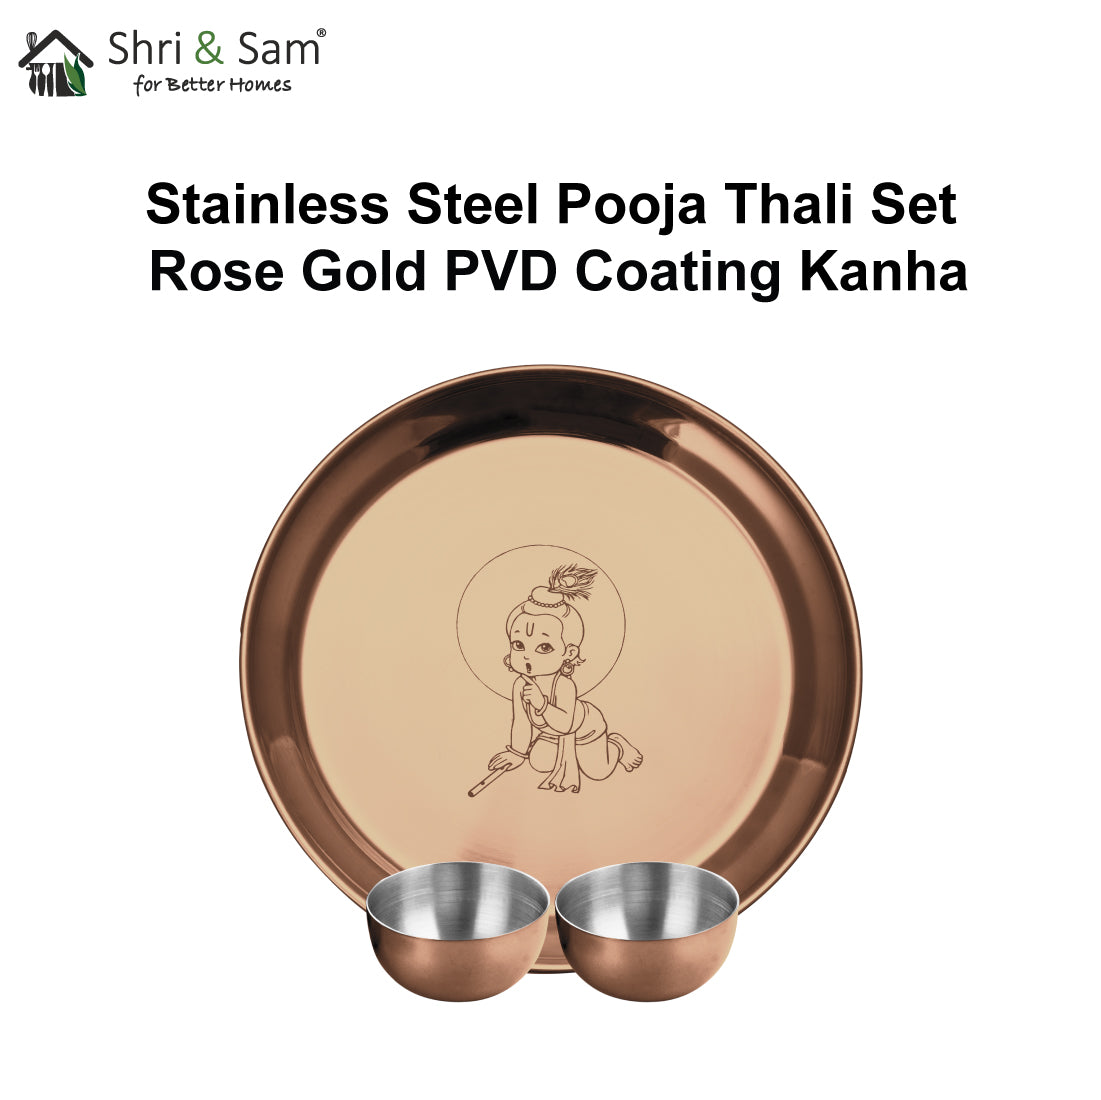 Stainless Steel Pooja Thali Set with Rose Gold PVD Coating Kanha